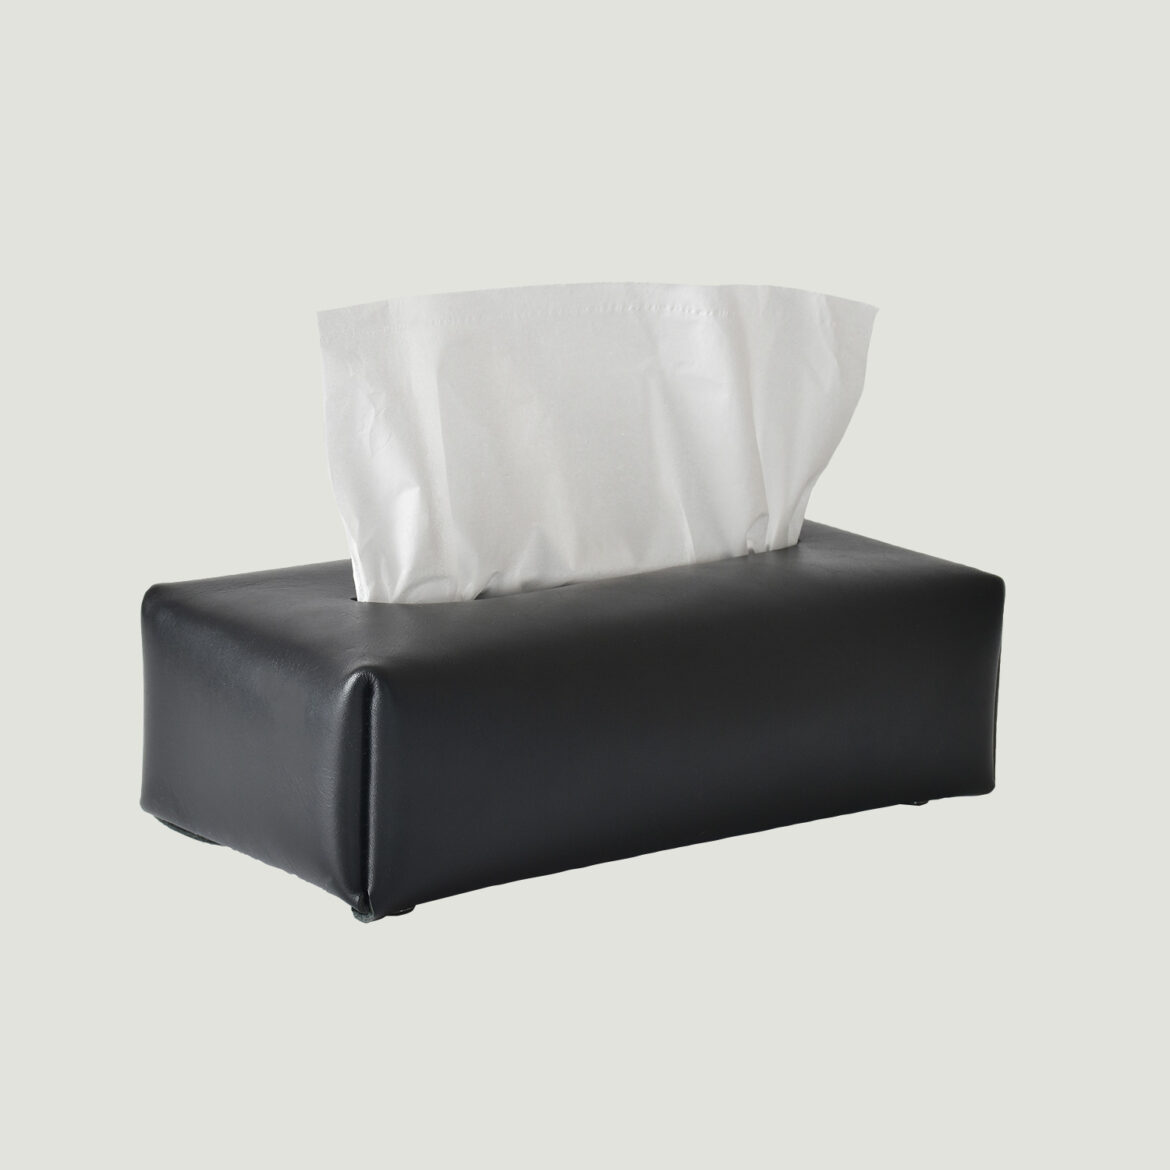 TISSUE COVER oiled leather black